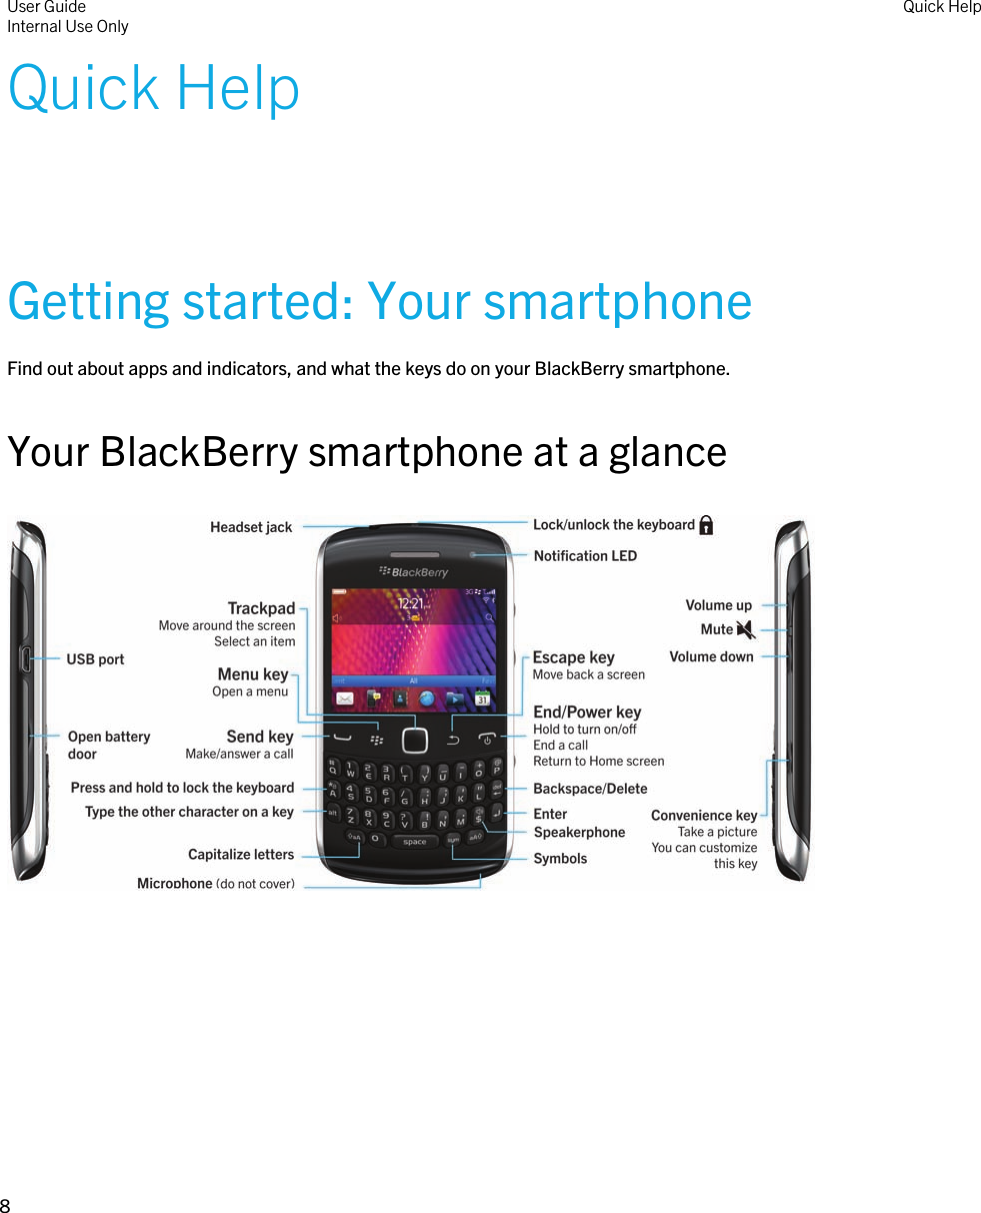 Quick HelpGetting started: Your smartphoneFind out about apps and indicators, and what the keys do on your BlackBerry smartphone.Your BlackBerry smartphone at a glance   User GuideInternal Use Only Quick Help8 